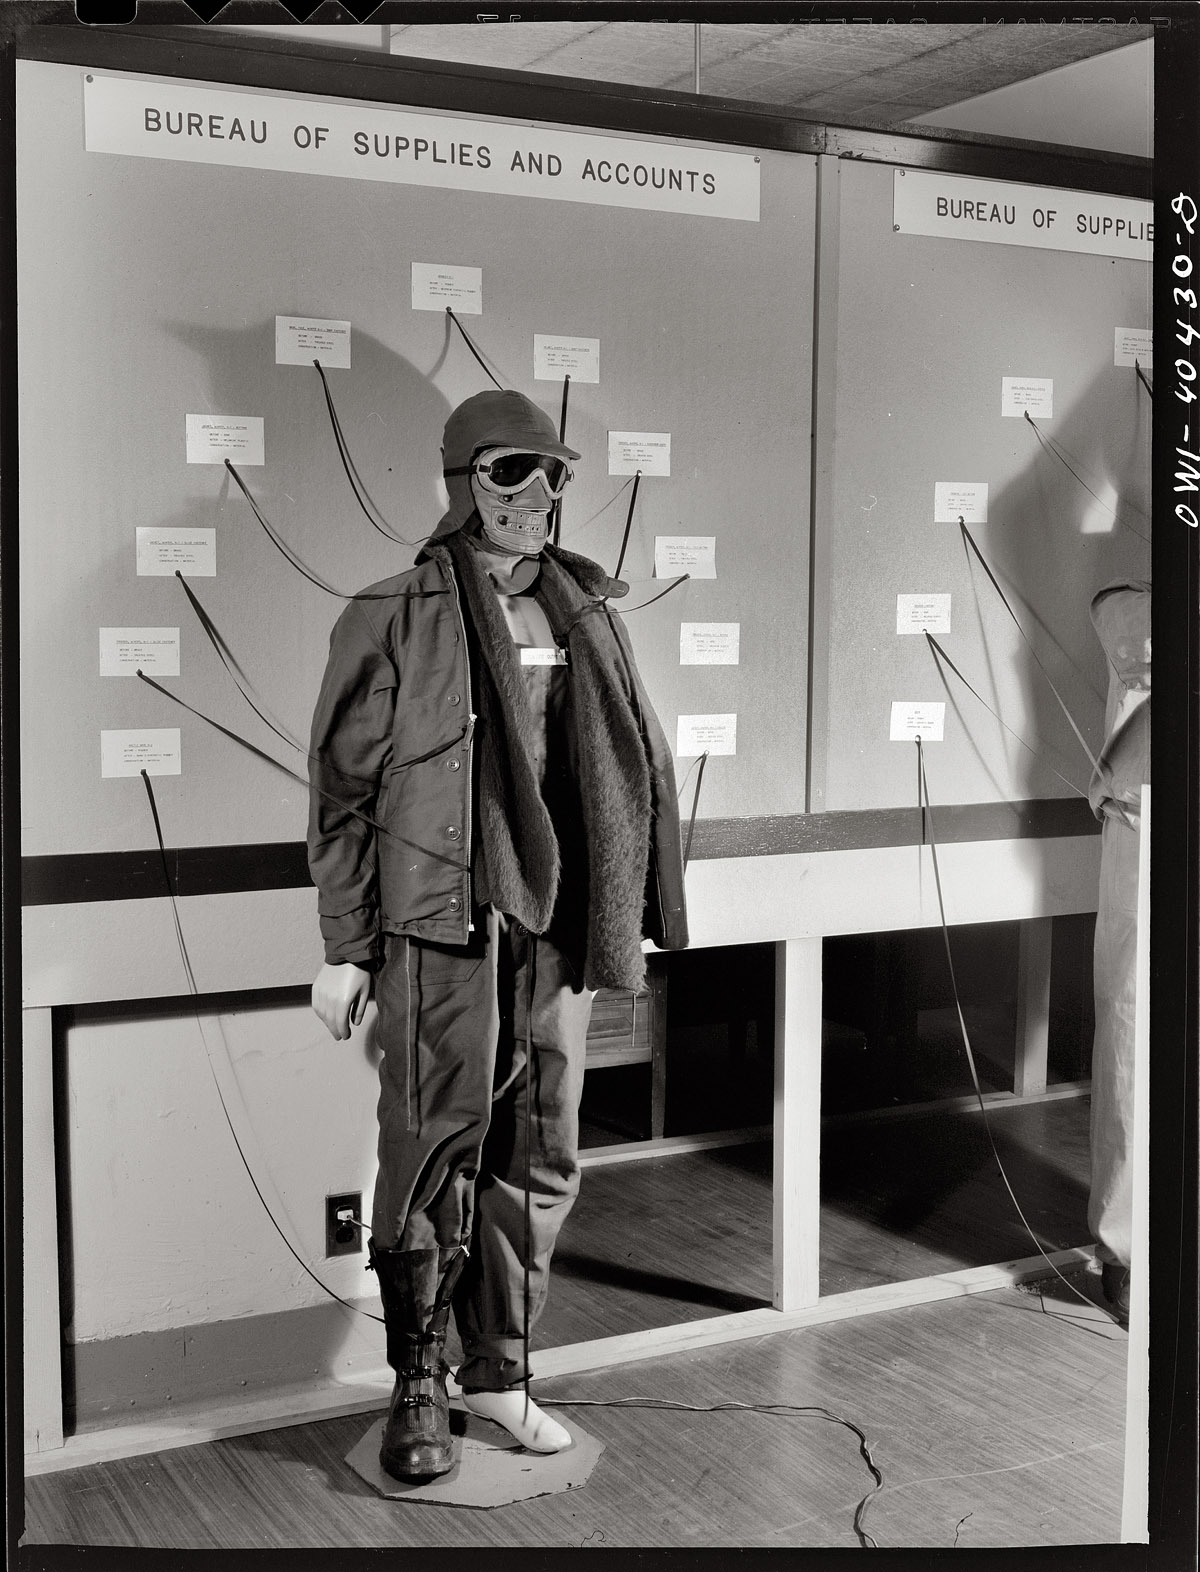 A display showing savings from materials substitution at the 1943 U.S.-Canadian Combined Conservation Committee Exhibit in Washington, D.C. View full size. Medium-format safety negative by Esther Bubley.